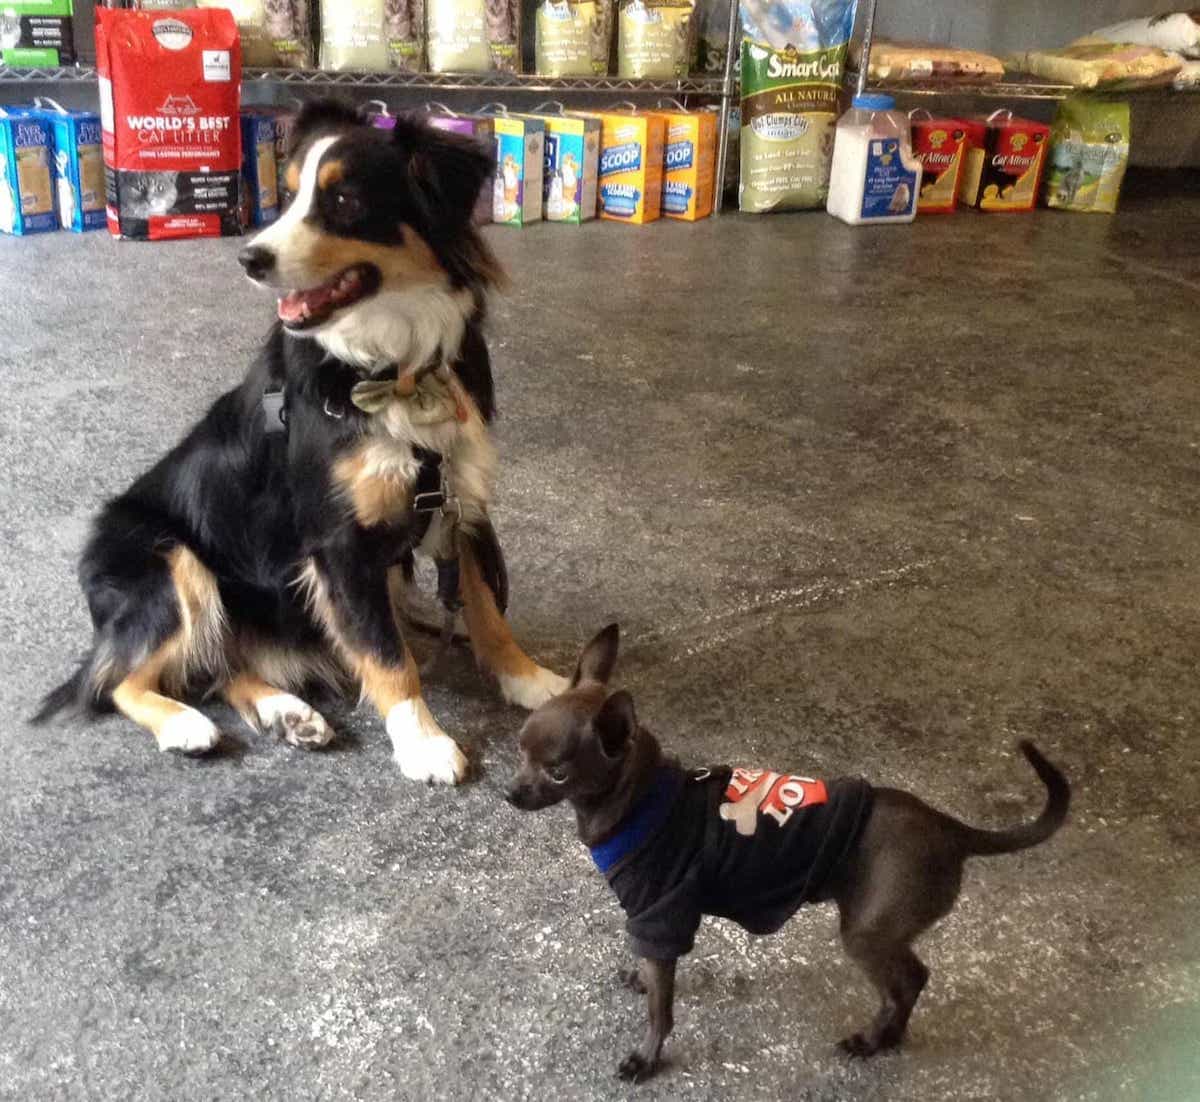 Two dogs, one little one big, in a pet store surrounded by dog and cat food